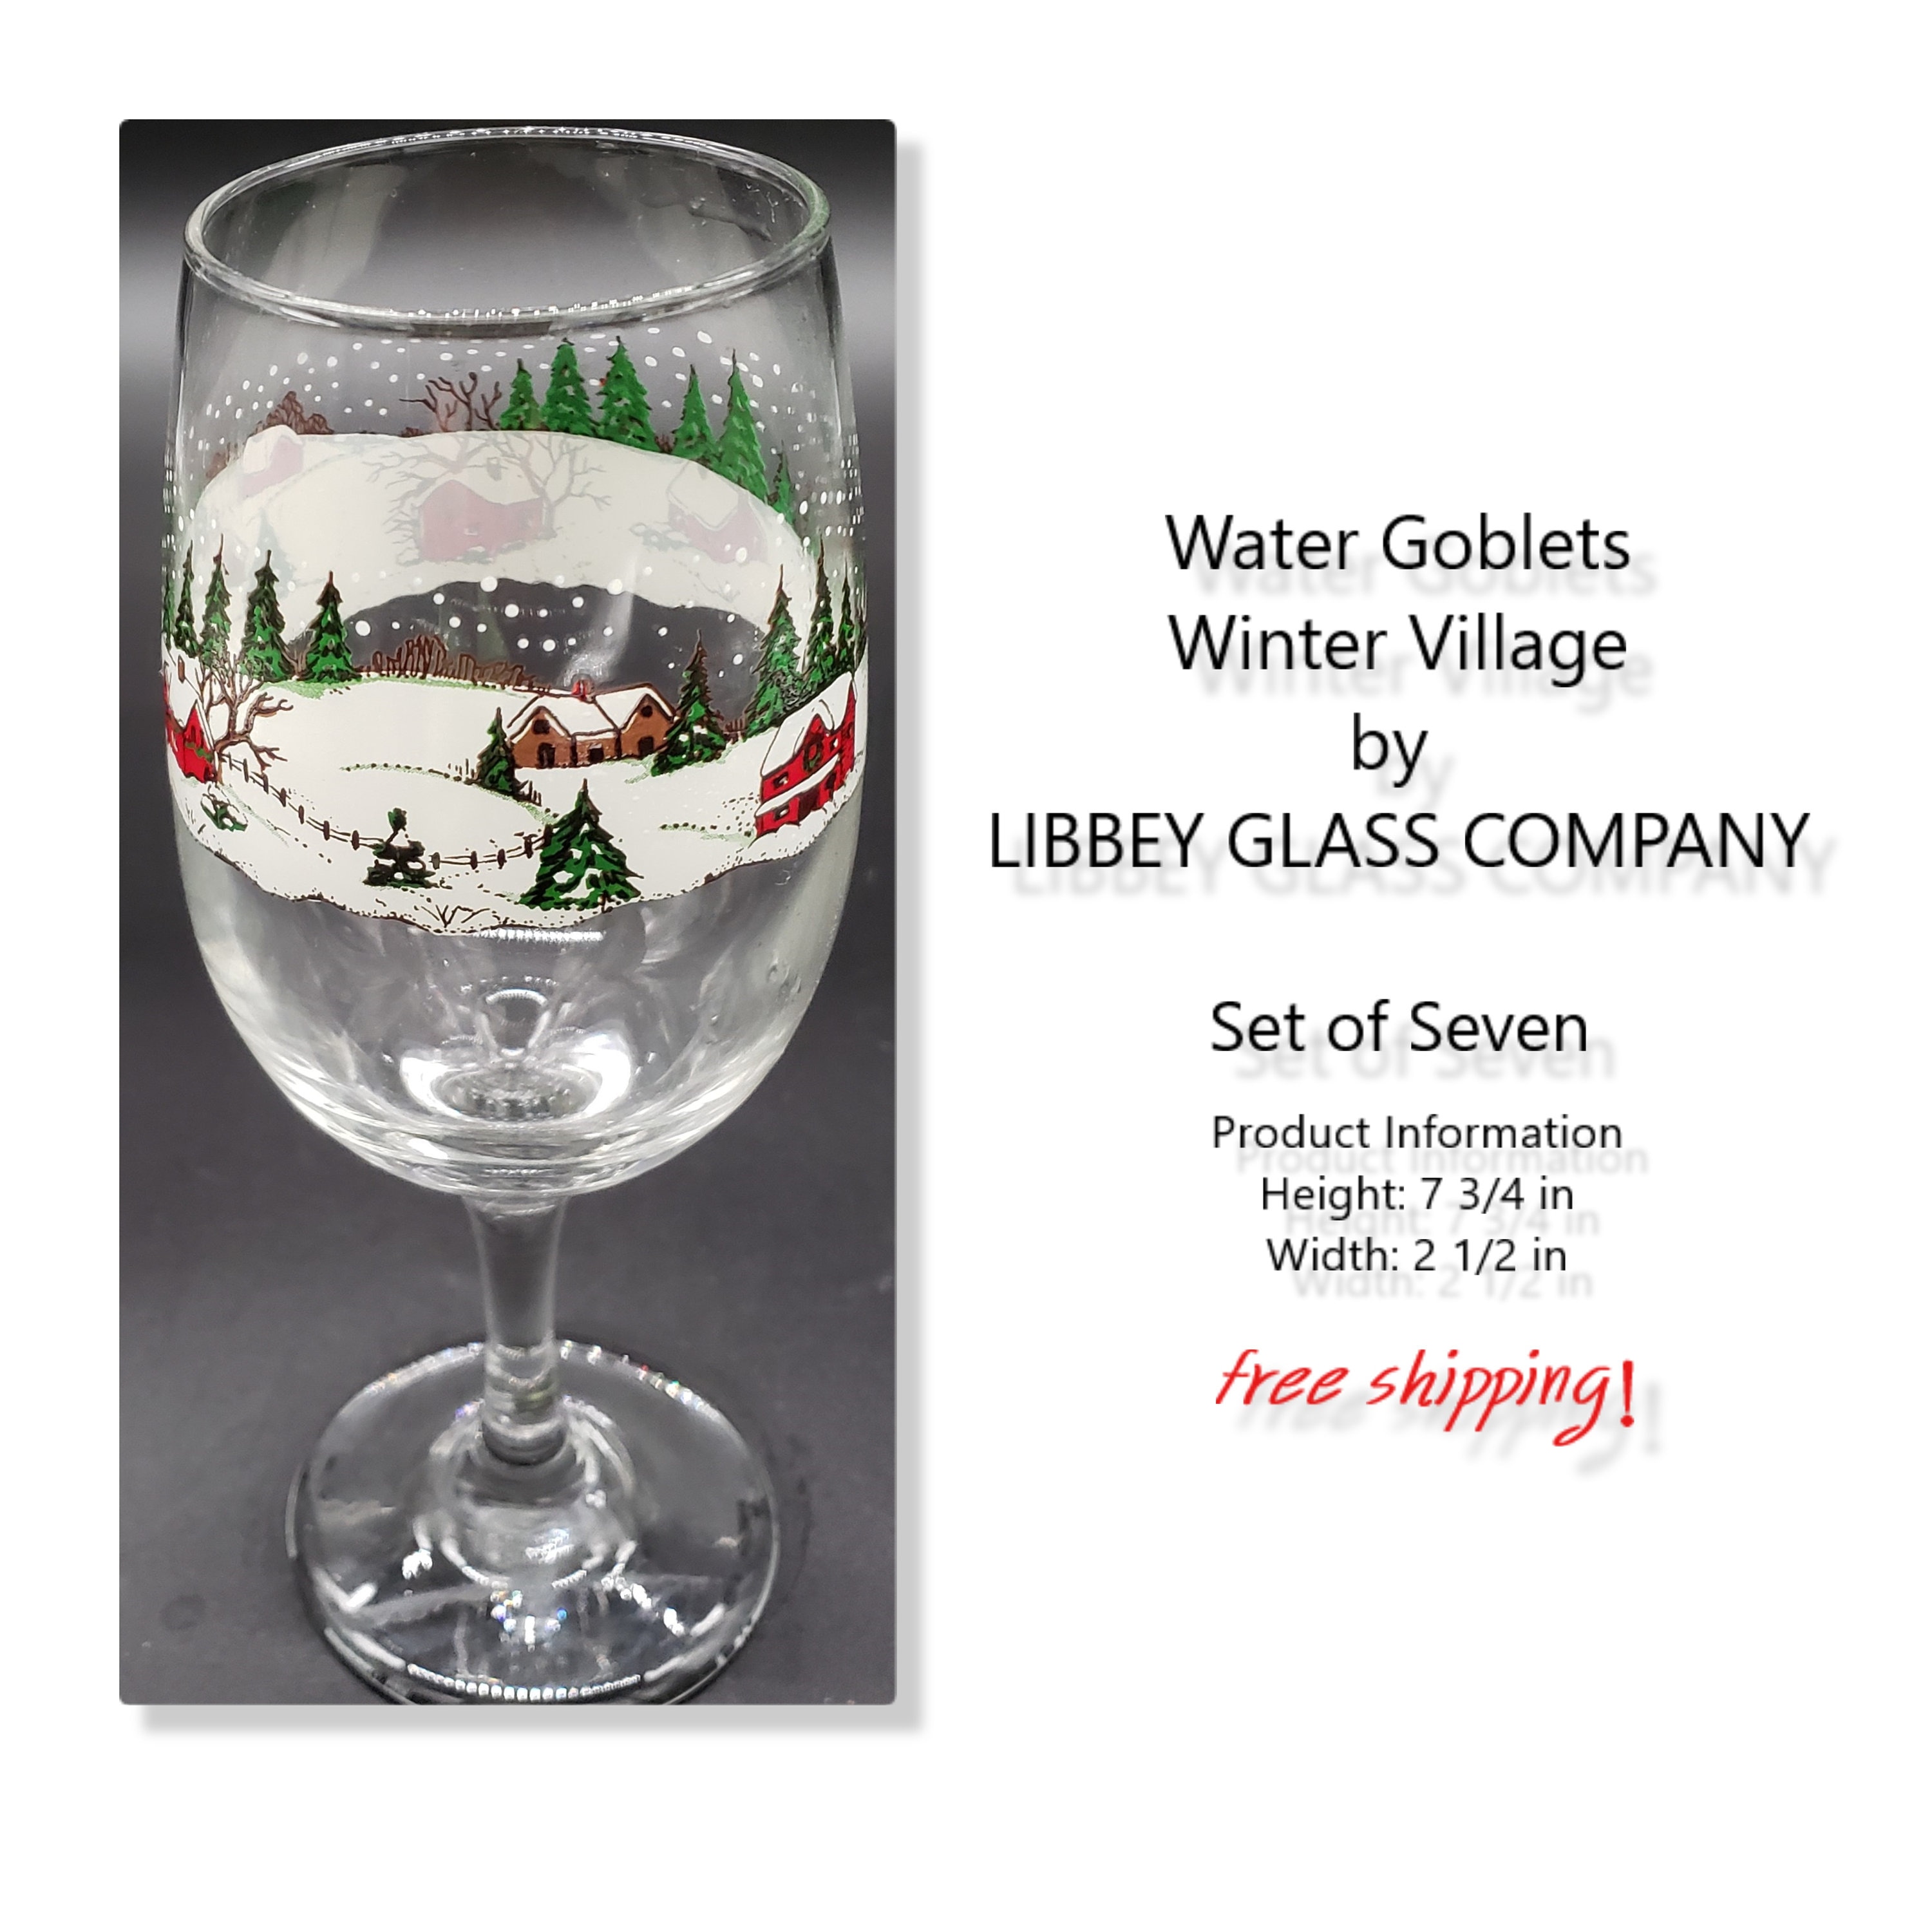 Glass Sets and Stylish Drinking Glasses from Village Creation